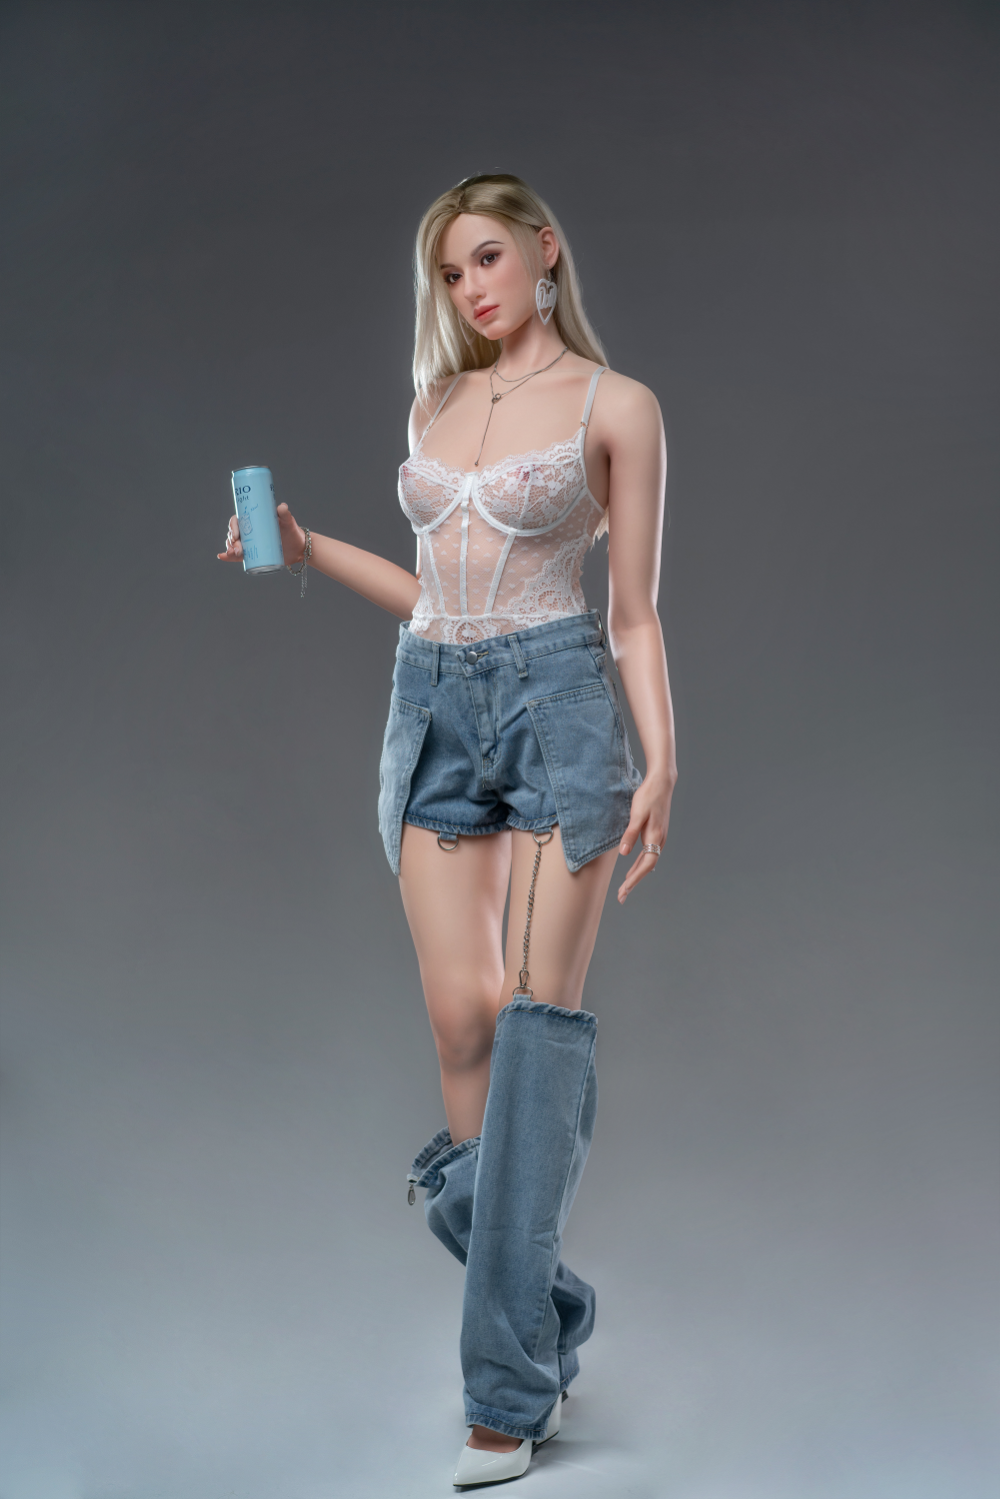 Zelex Doll 175 cm E Silicone - Sophia | Buy Sex Dolls at DOLLS ACTUALLY